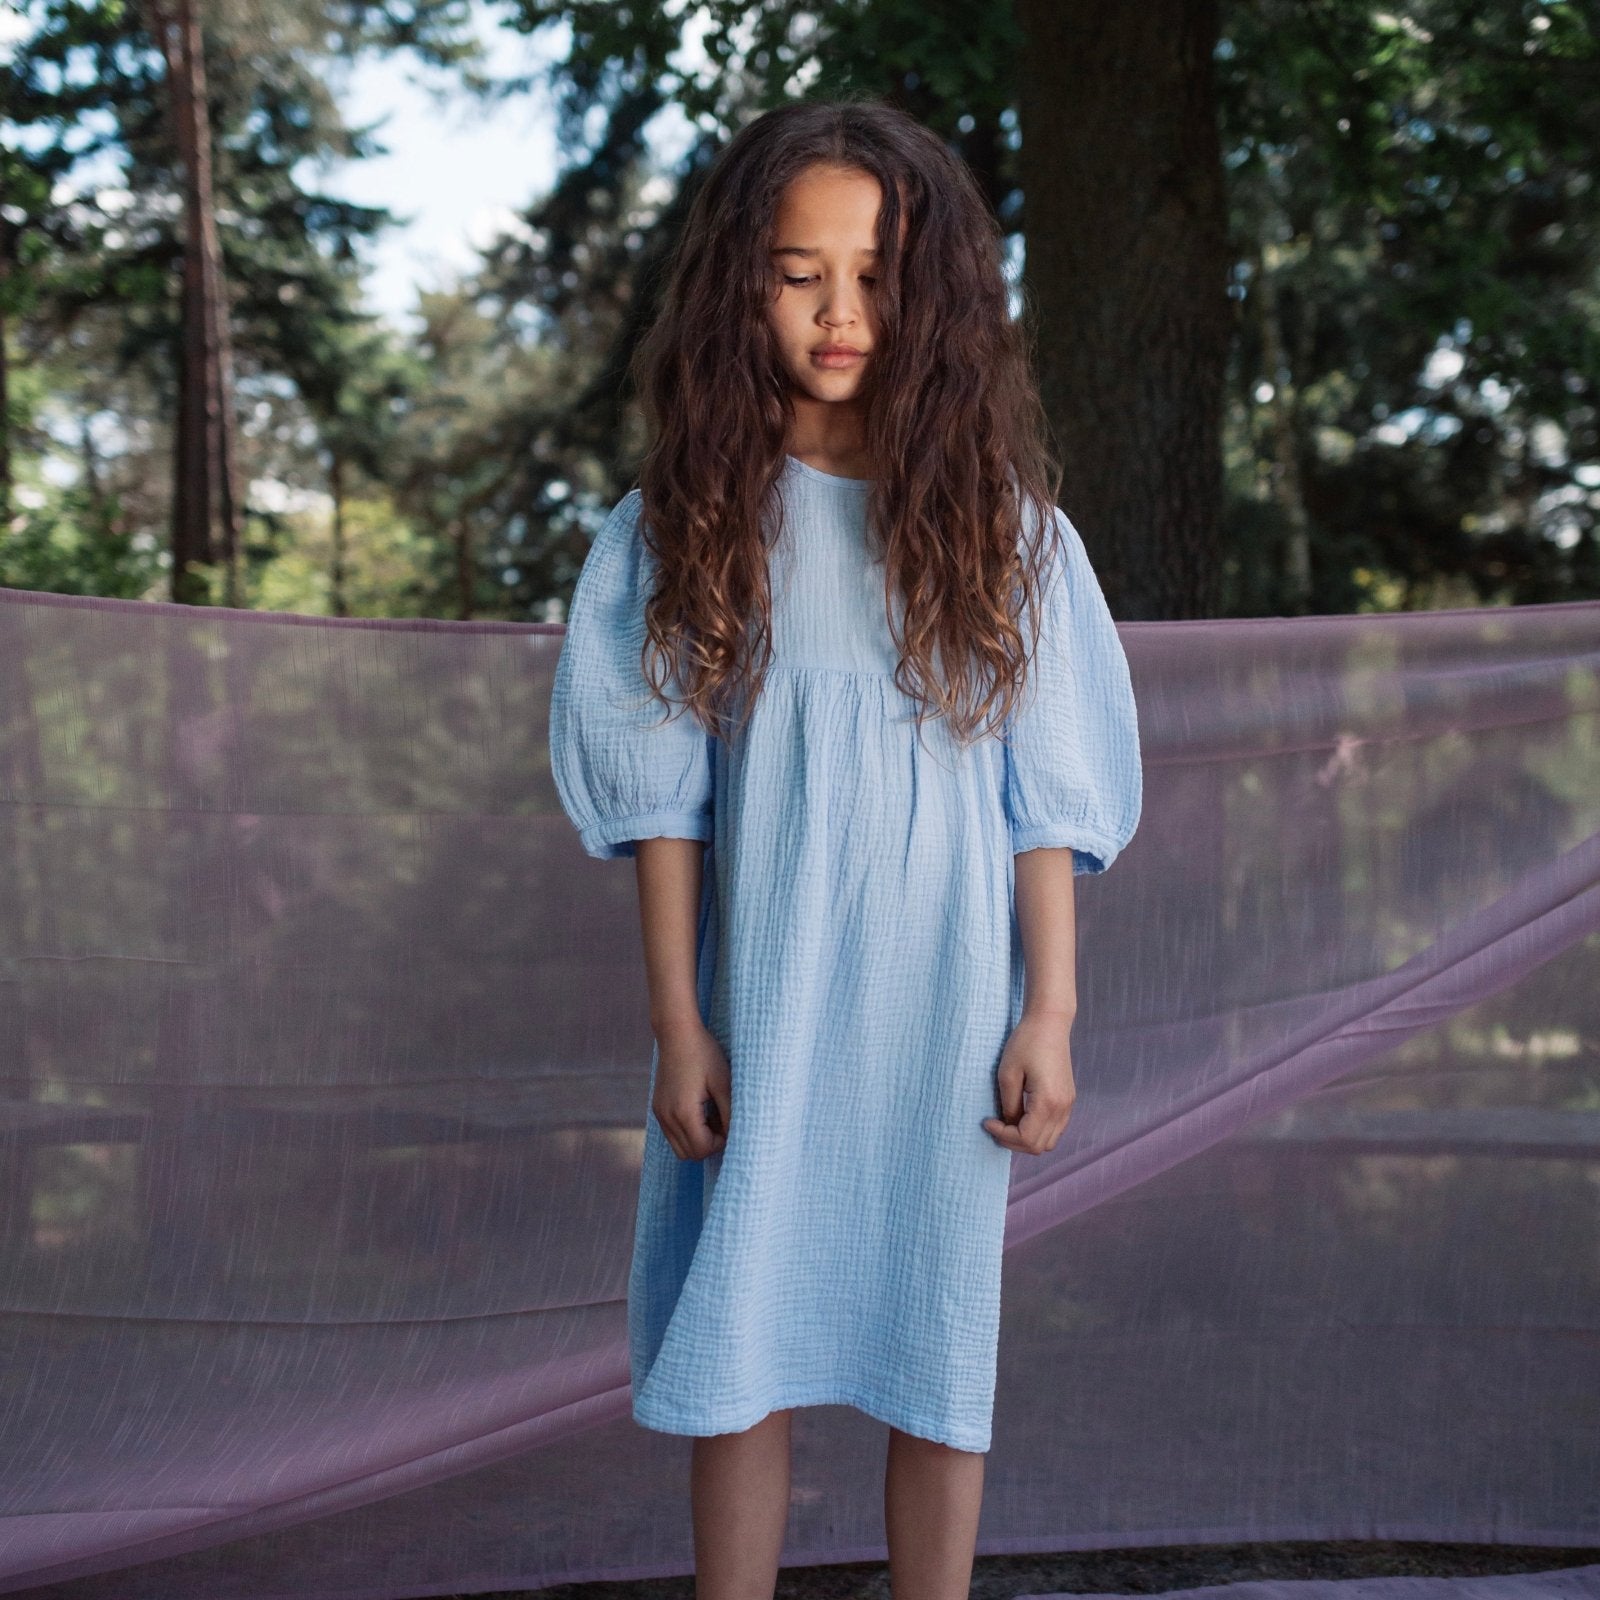 Gigi Dress - Serenity Blue find Stylish Fashion for Little People- at Little Foxx Concept Store